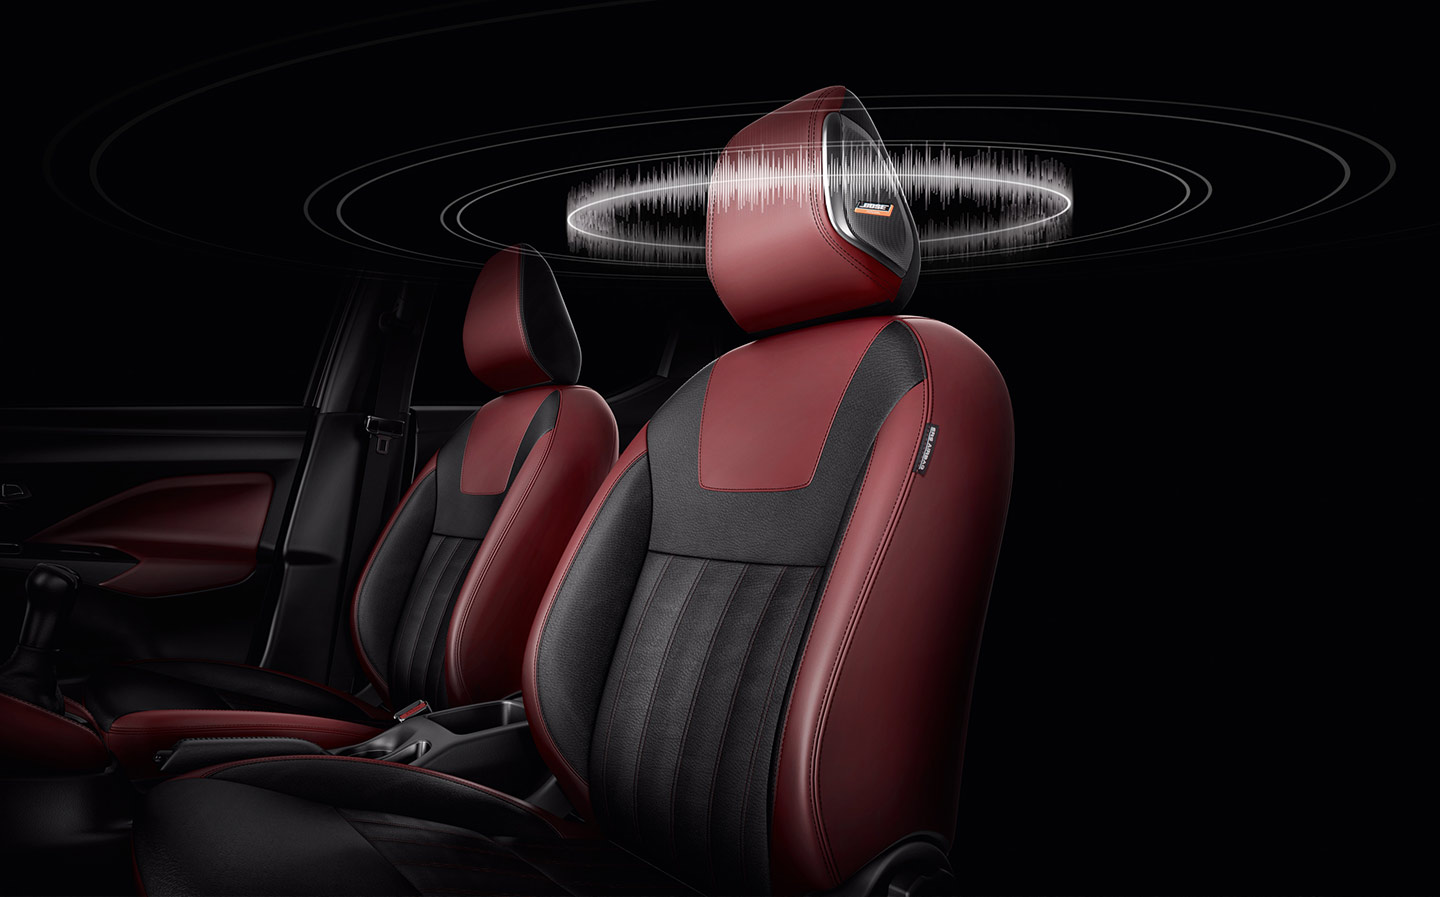 Bose headrest speakers "whisper" directions into driver's ears